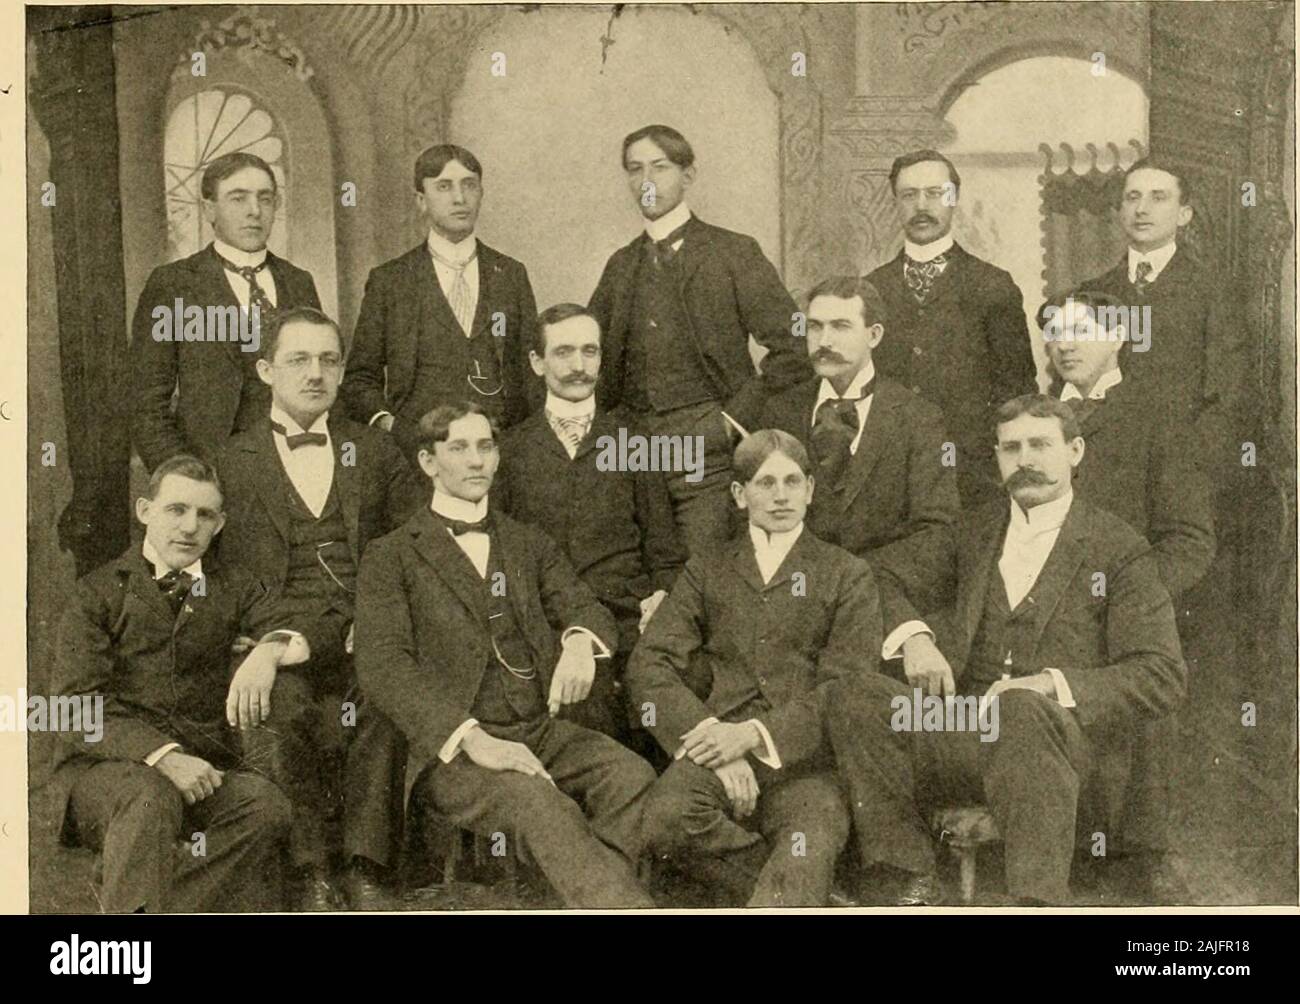 The Lanthorn 1899 . THE SUSQUEHANNA. EDITORIAL STAFF. Editor-in-Chief, Chas. Birt Harman, 97. oo Managing Editor, D. J. Snyder, oo Associate Editors. Exchange, J. E. Zimmerman. 99 Alumni, H. C. Michael, 96, 99 Locals and Personals, H. I BRUNGART, 00 C&lt; )X1 )ENTS, Clio, Chas. Lambert, oi Theological, G 0. RlTTER, Philo, S. N. Carpenter, 98, 00 V. M. C. A., Cyril H. Haas. 99 Athletics, John S. Schoch, oo Prep., W. J. Zhchman. 03 Business Manager, Geo. A. Livingston. 98, 01 Asst. Bus. Manager, E. M. Bringart, oo. SUSQUEHANNA DAILY. STAFF. Editor-in-Chief, C. B. Harman Associates. I. H Wagner E Stock Photo